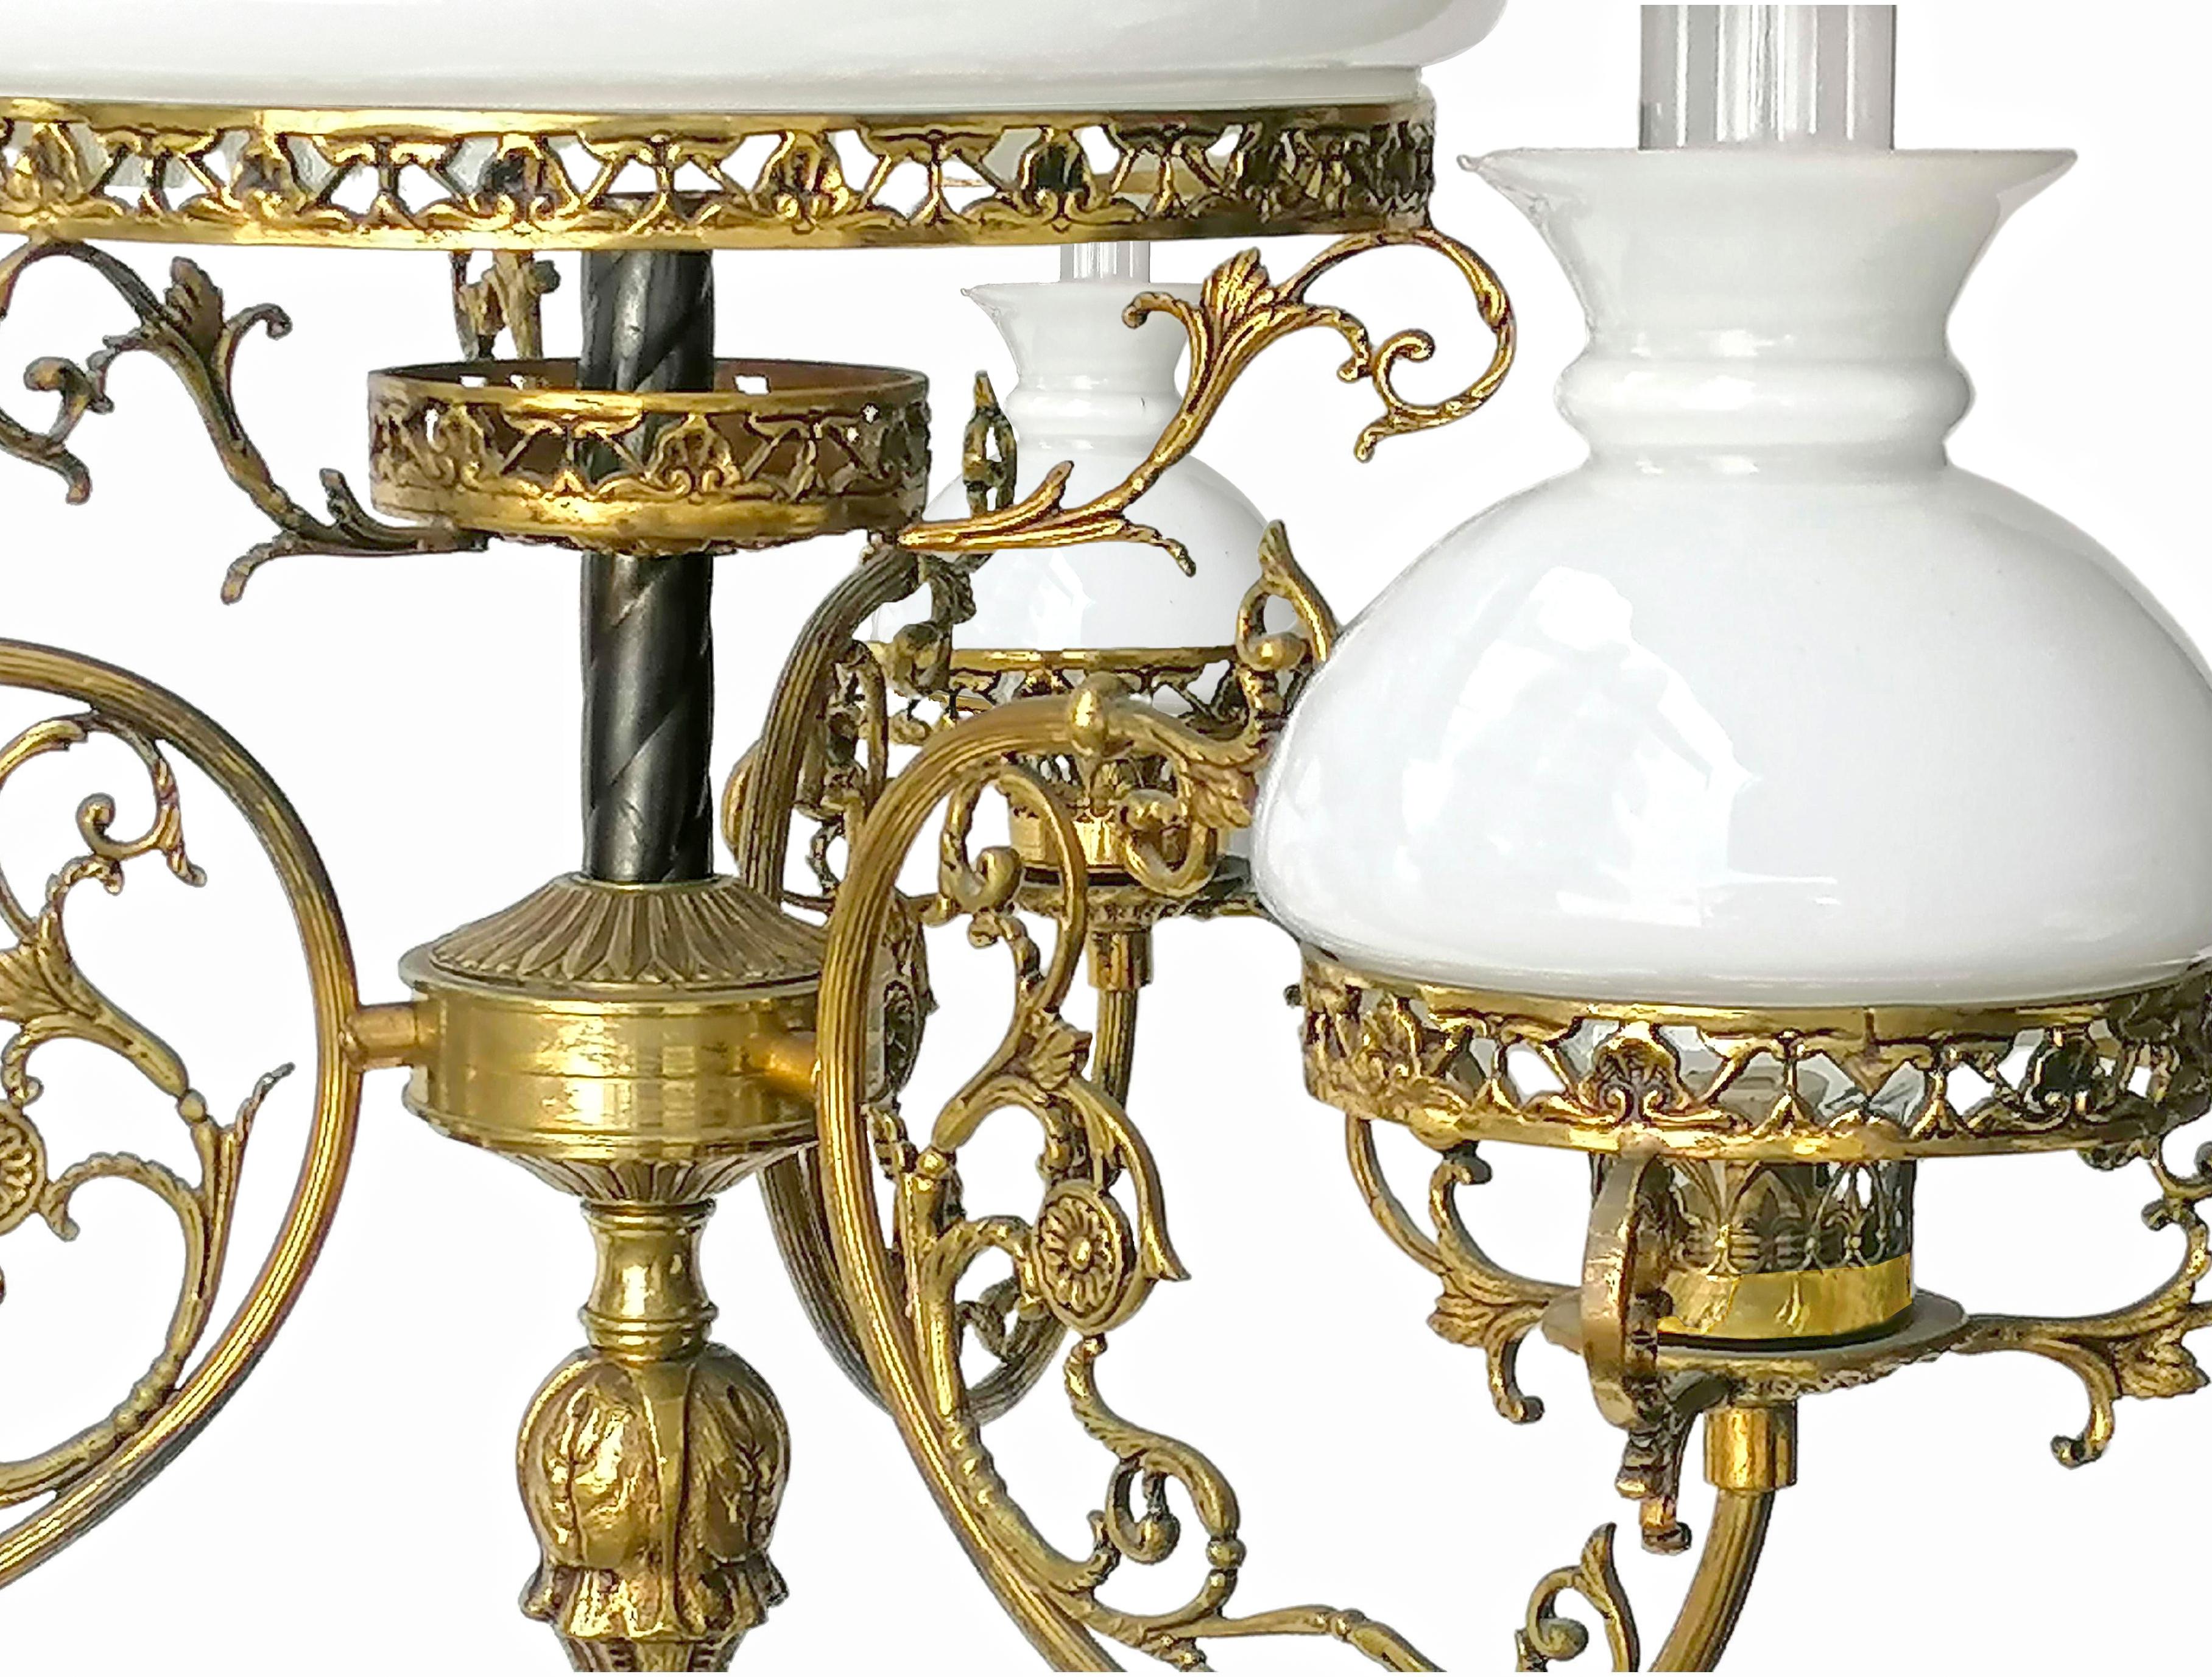 Pair of French Victorian Oil Floor Lamps in Ornate Gilt Bronze & Opaline Glass In Good Condition For Sale In Coimbra, PT